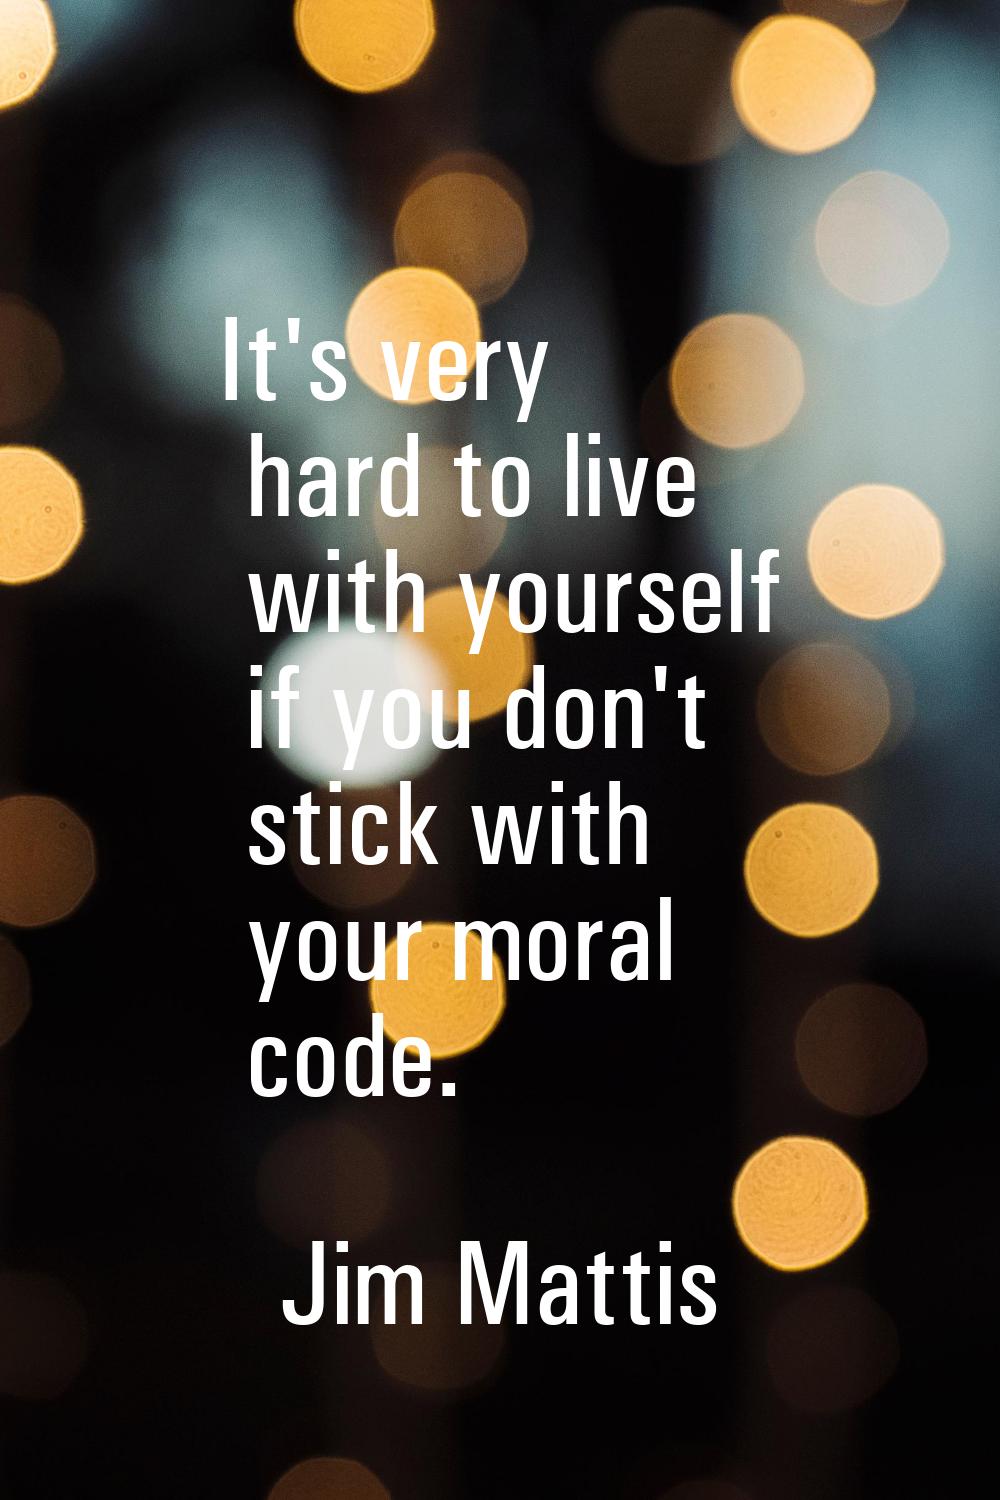 It's very hard to live with yourself if you don't stick with your moral code.